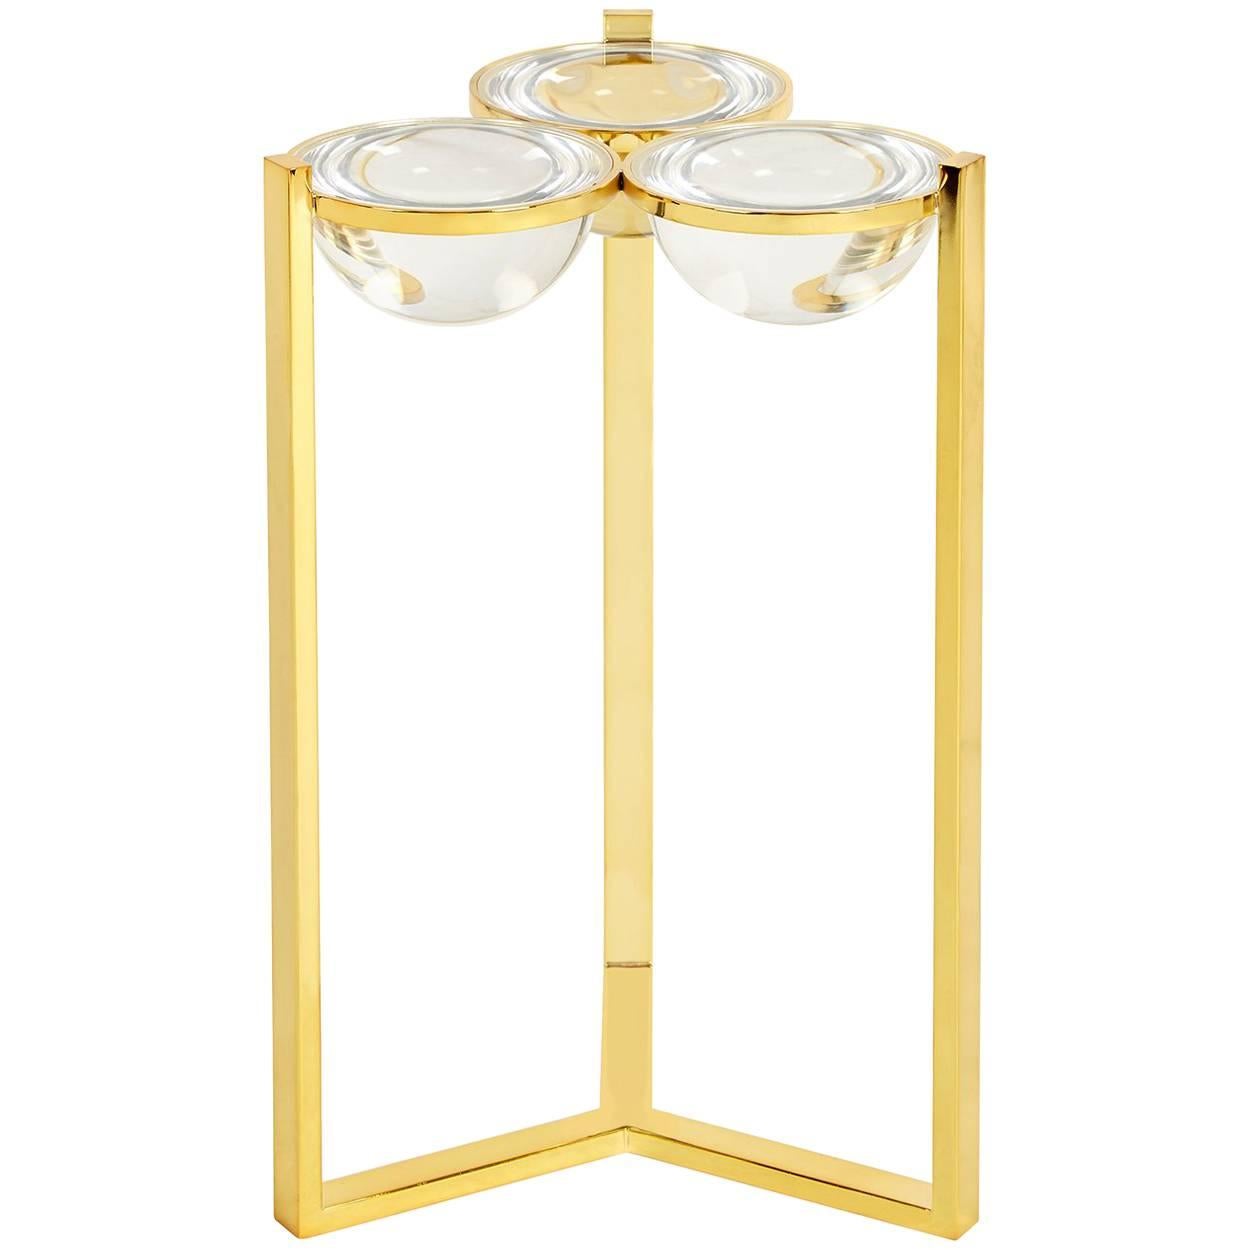 Globo Drinks Acrylic and Polished Brass Side Table by Jonathan Adler